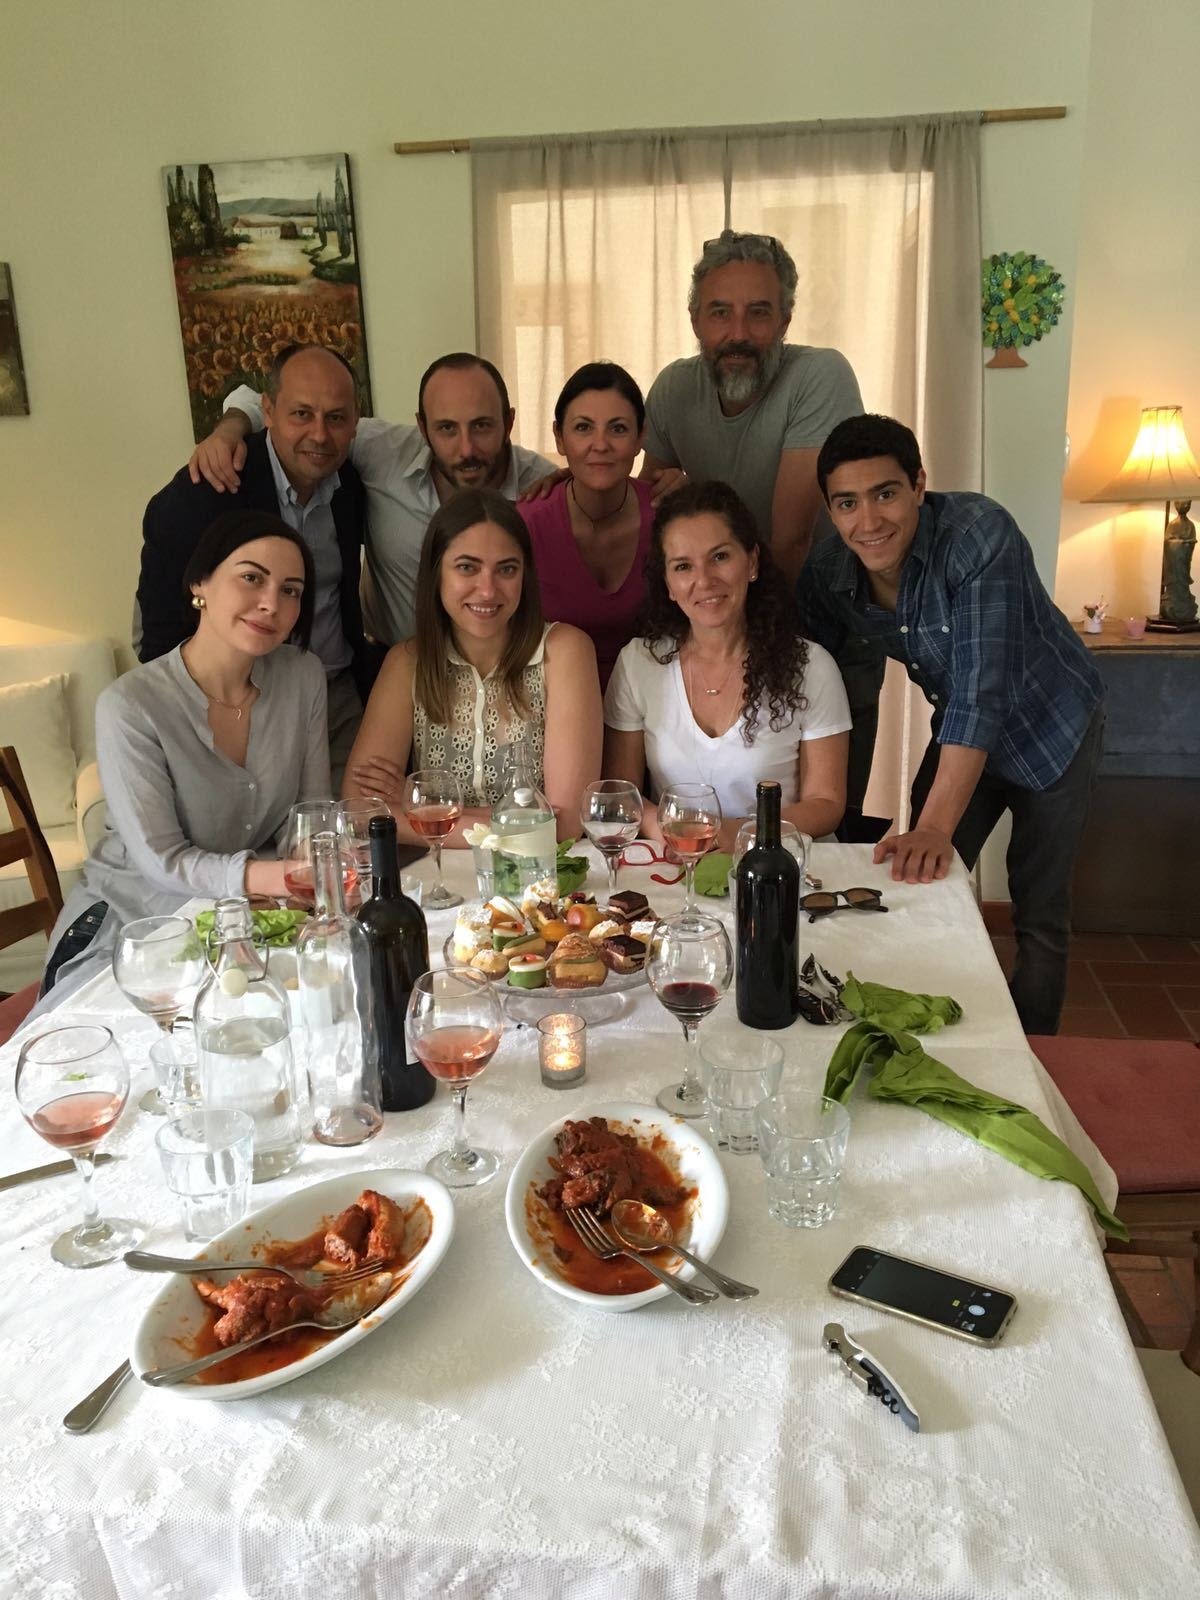 Next stop: Puglia. Well Foggia to be exact. We caught up with Giusy Albano of Tenuta Fujanera. She and  her family hosted us for a traditional Pugliese lunch that I’m still dreaming about.